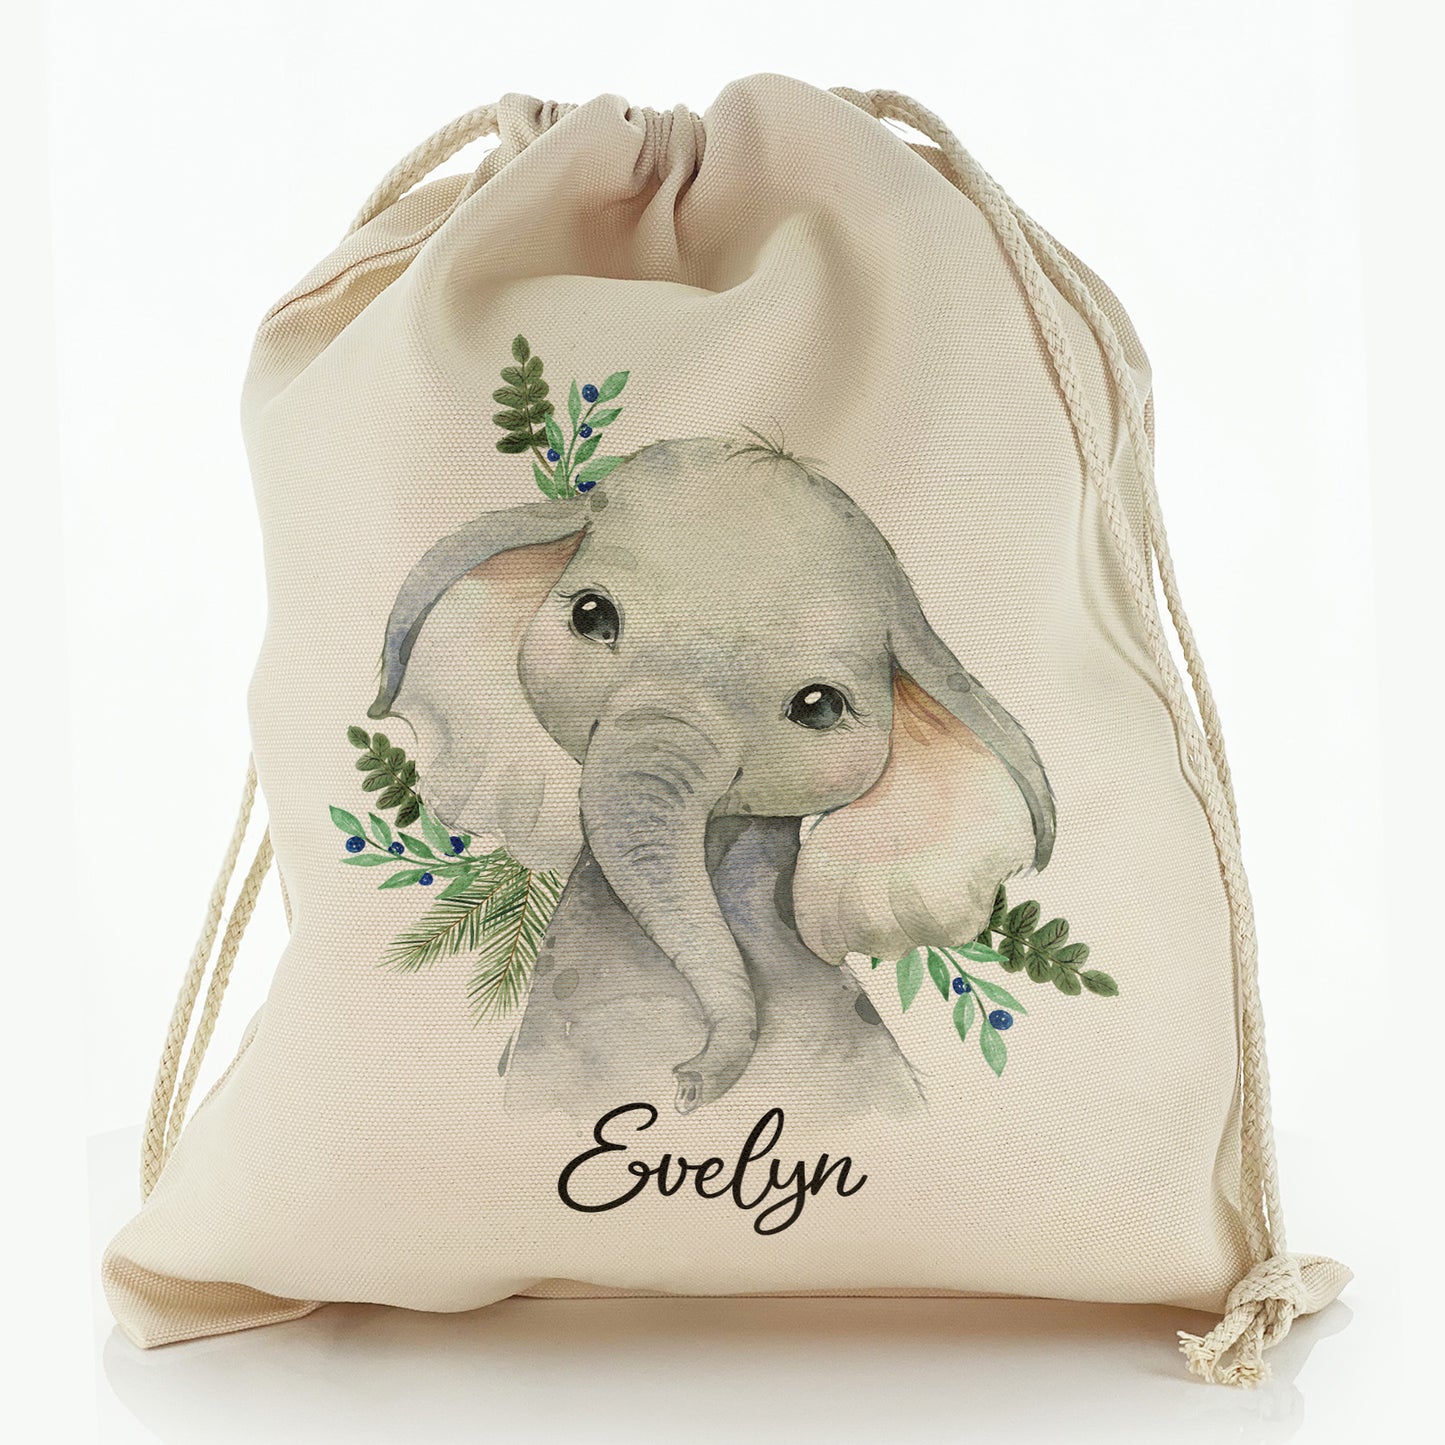 Personalised Canvas Sack with Elephant Blue Berries and Cute Text